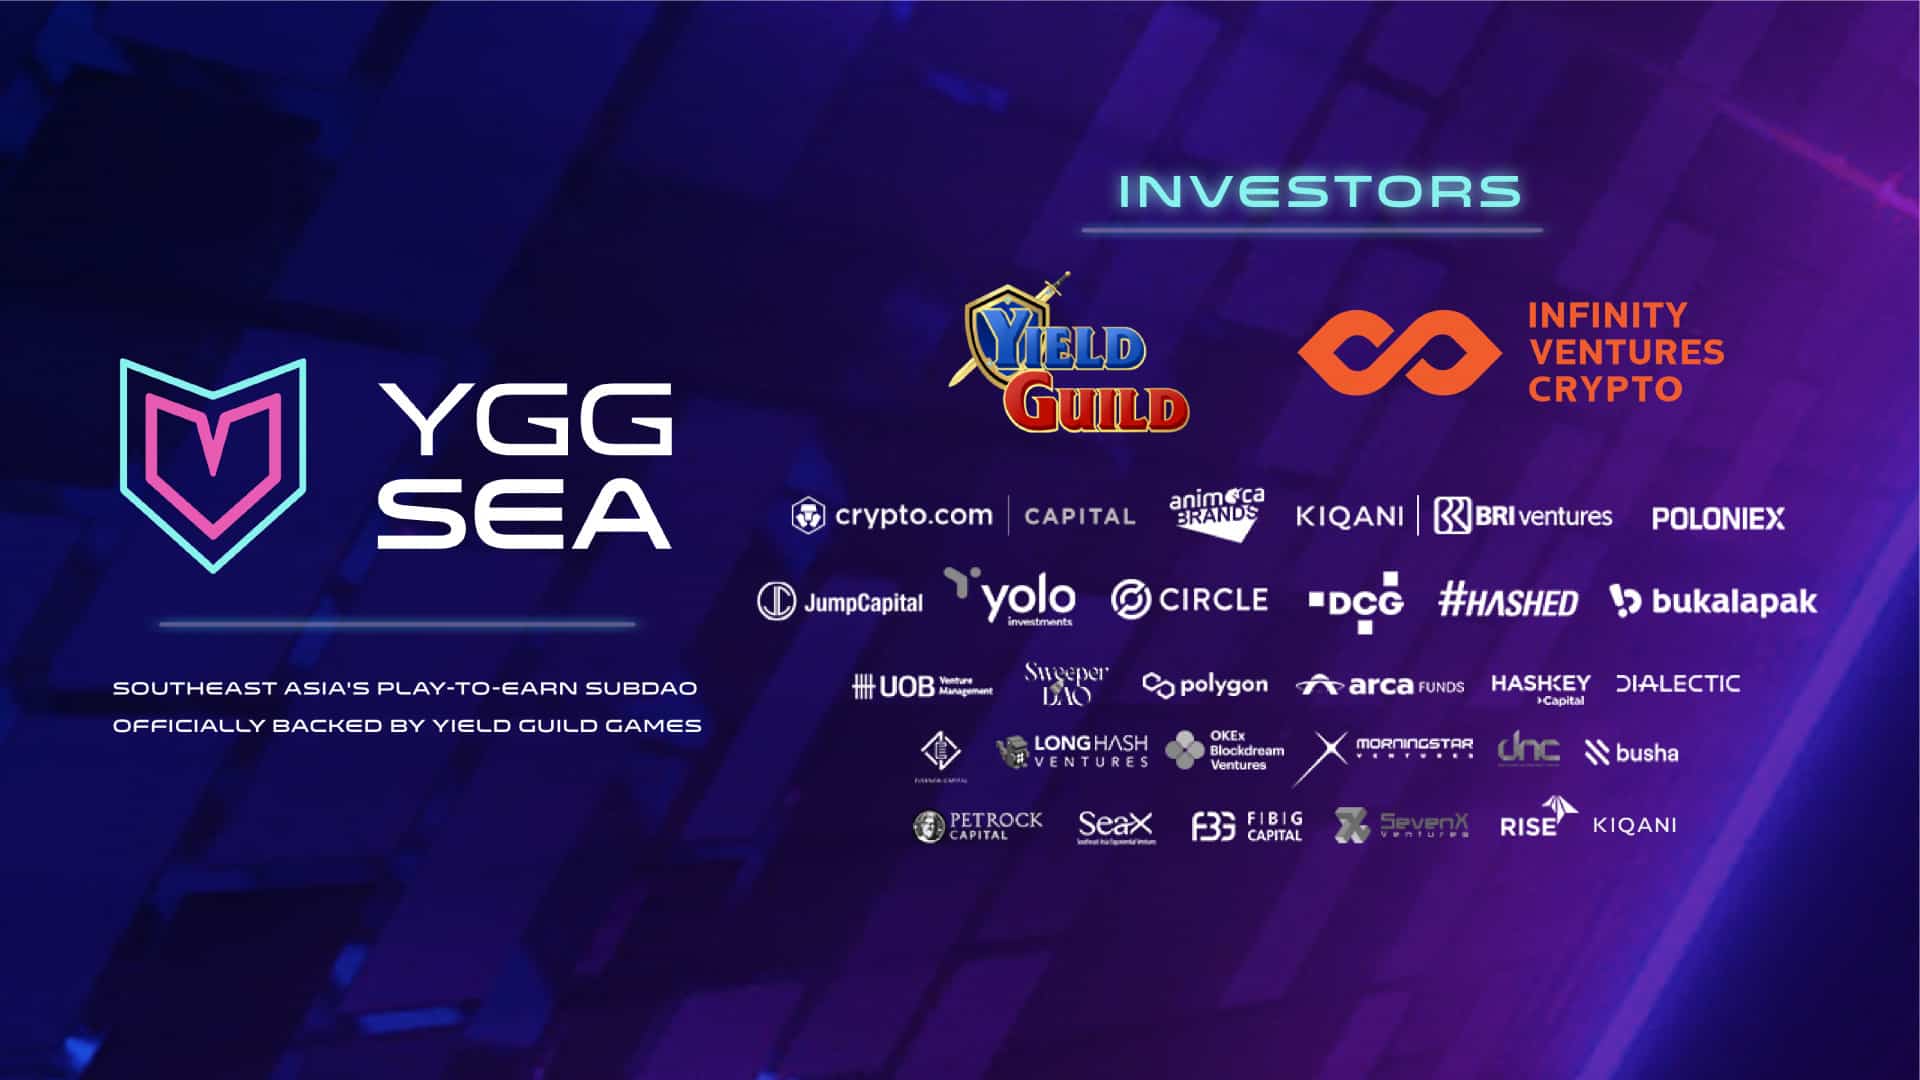 Ygg-sea-secures-$15m-from-marquee-investors-to-boost-p2e-gaming-in-southeast-asia